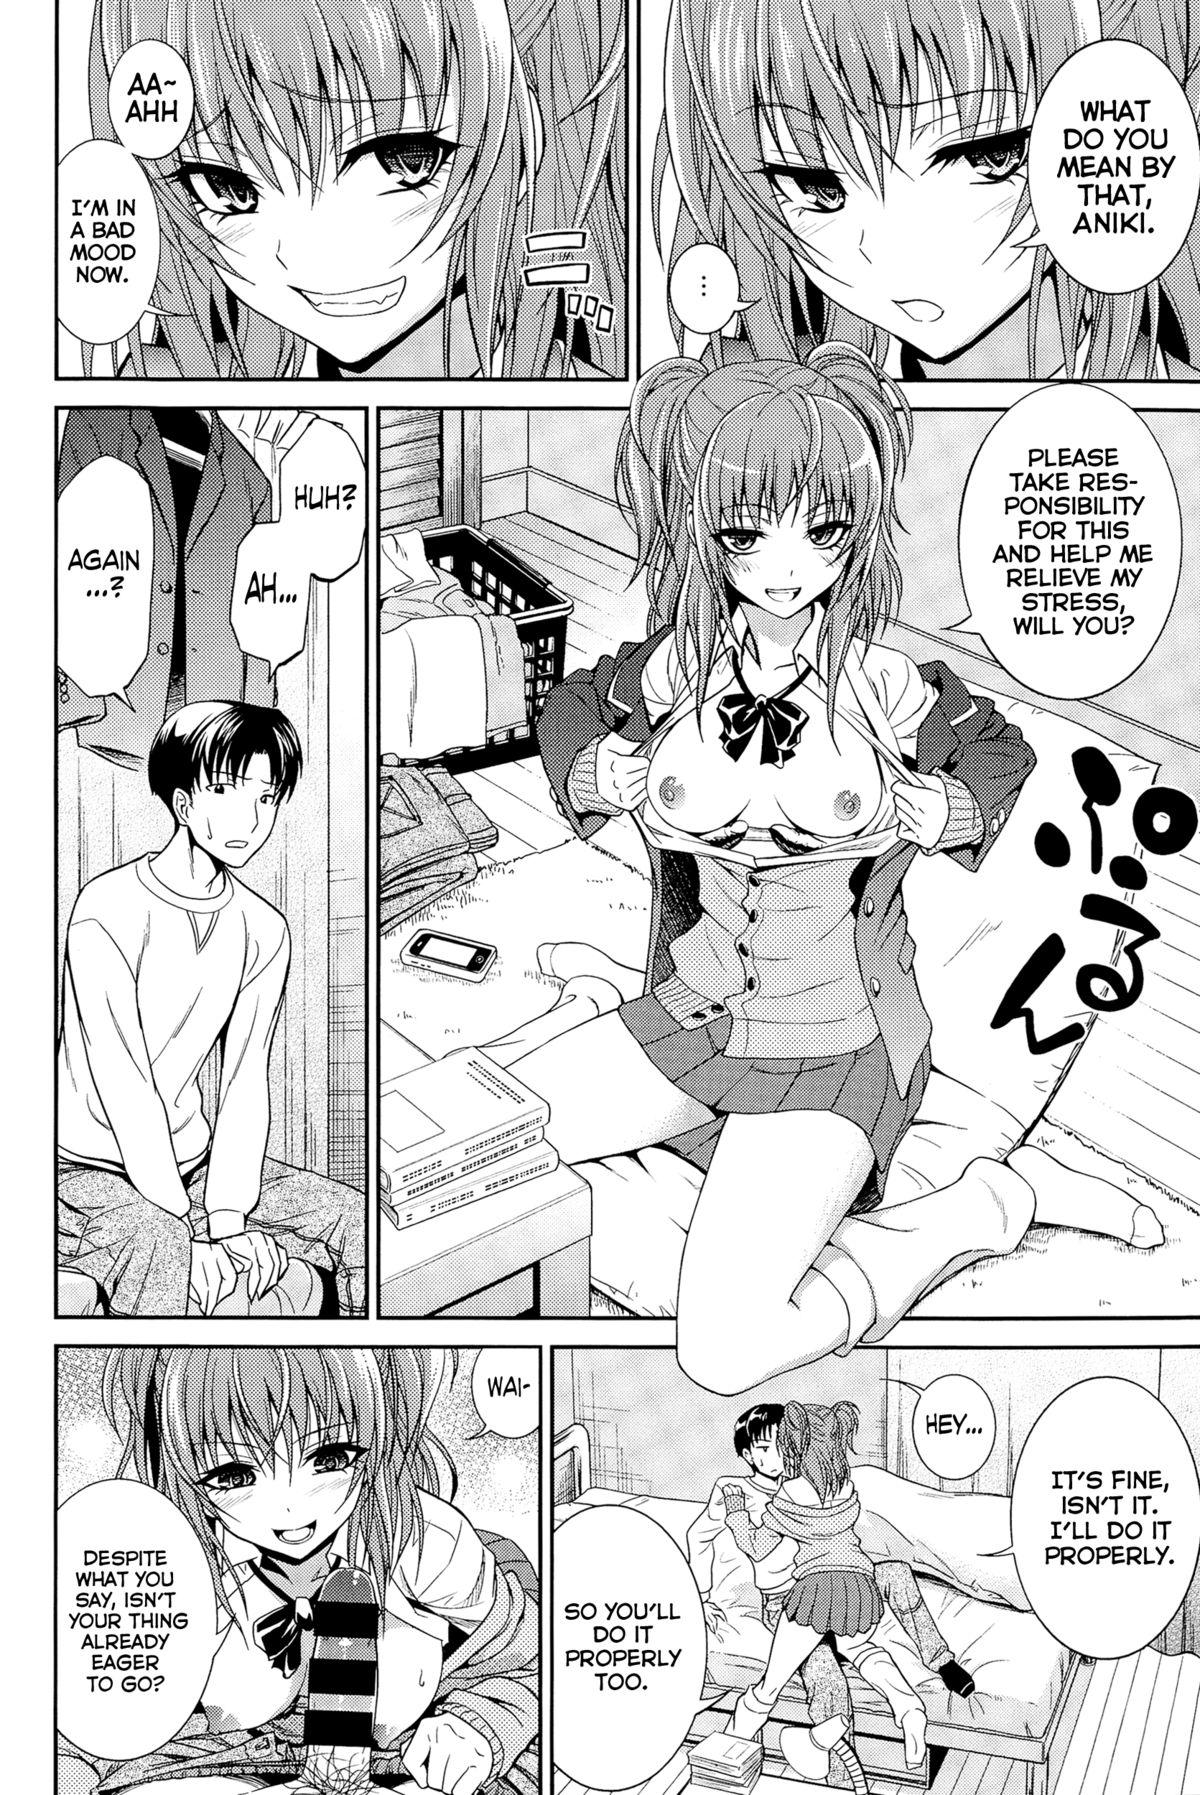 Anime Imouto no Iiwake | Sister's Excuse Pussy - Page 2